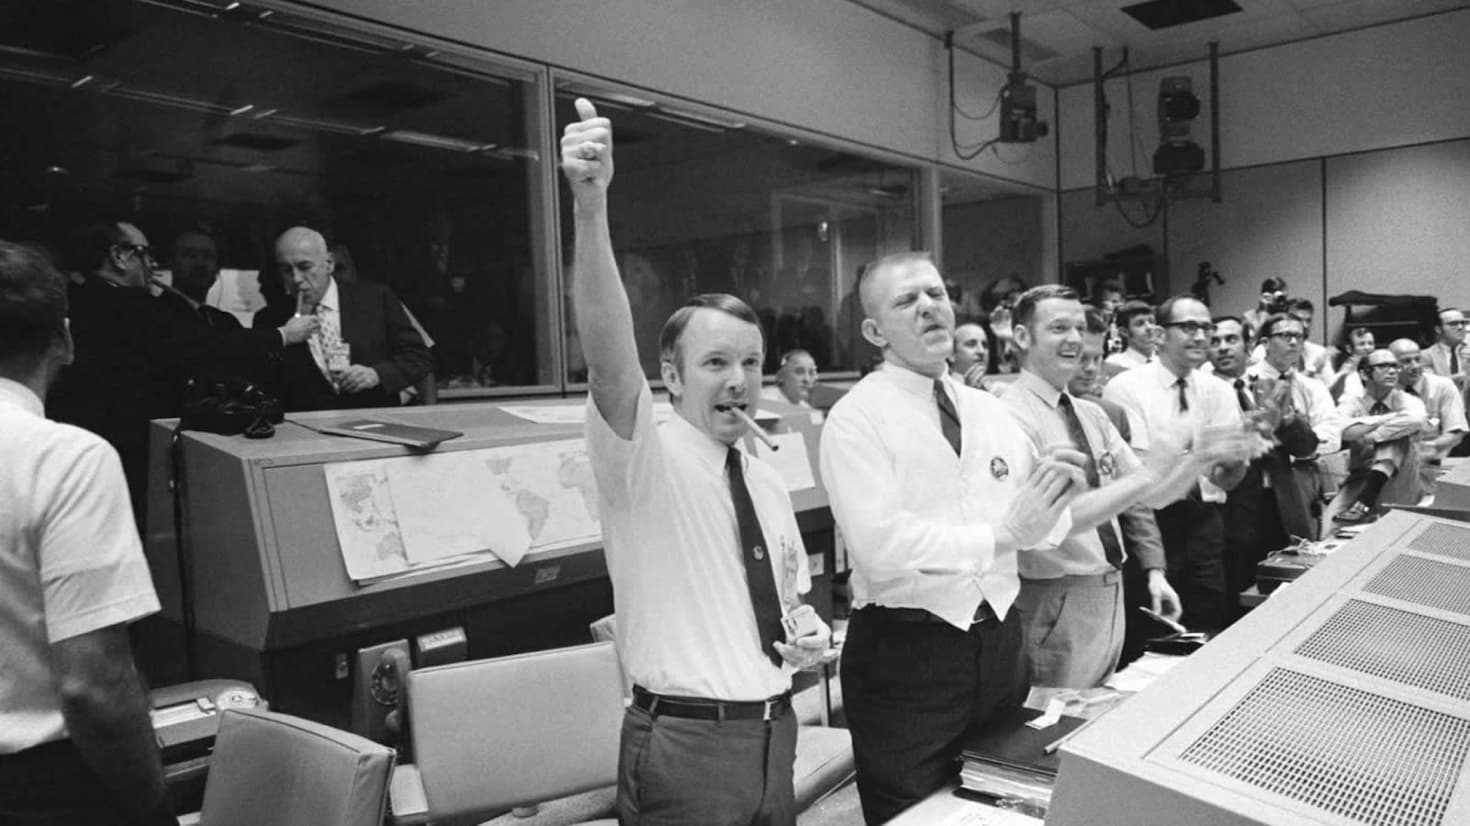 Historic photo of NASA ground control members celebrating mission success